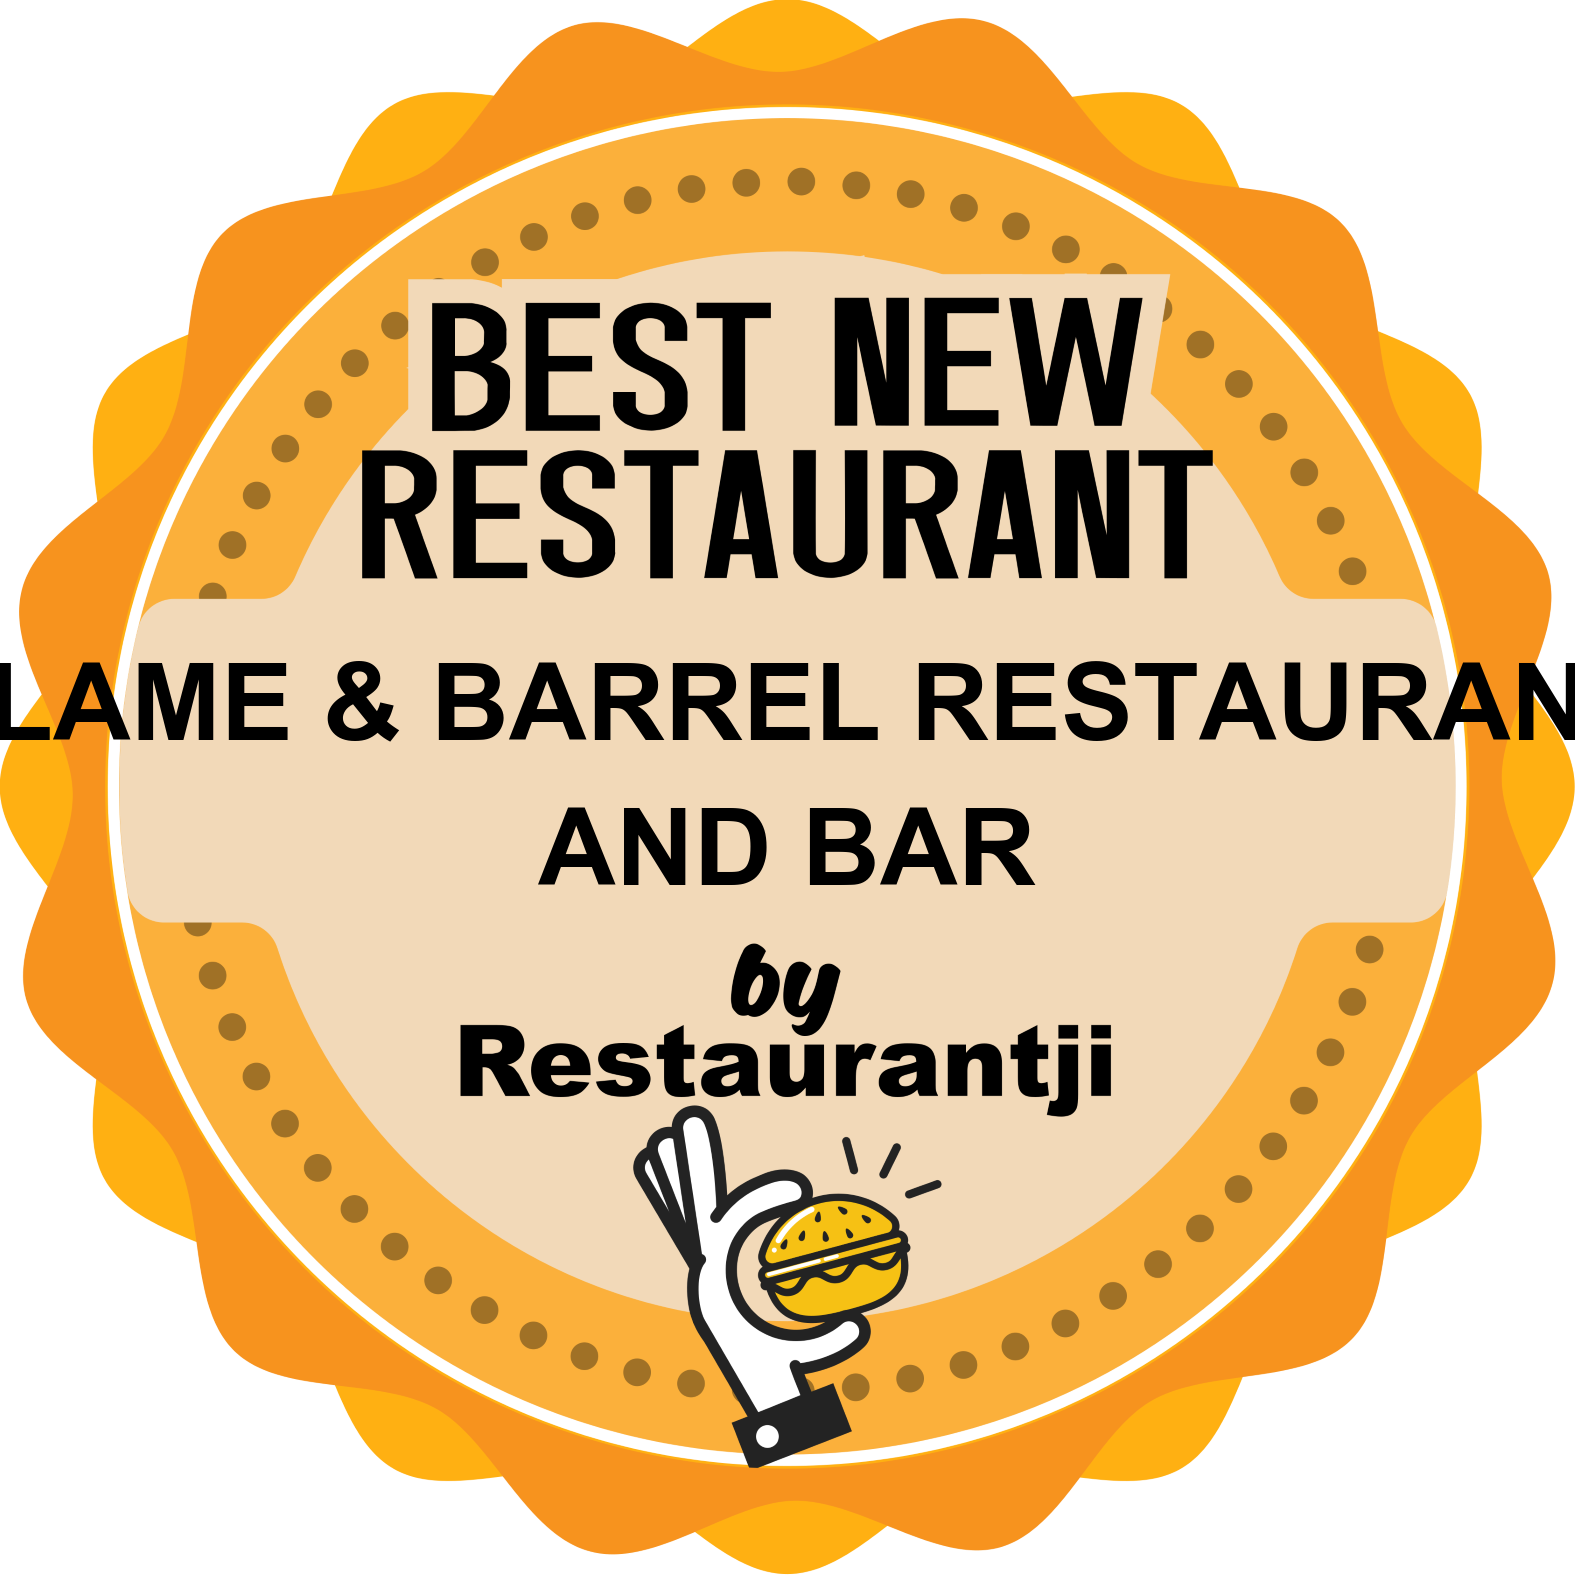 Flame & Barrel Restaurant and Bar is celebrated on Restaurantji - featuring the latest reviews and ratings for restaurants in your area.